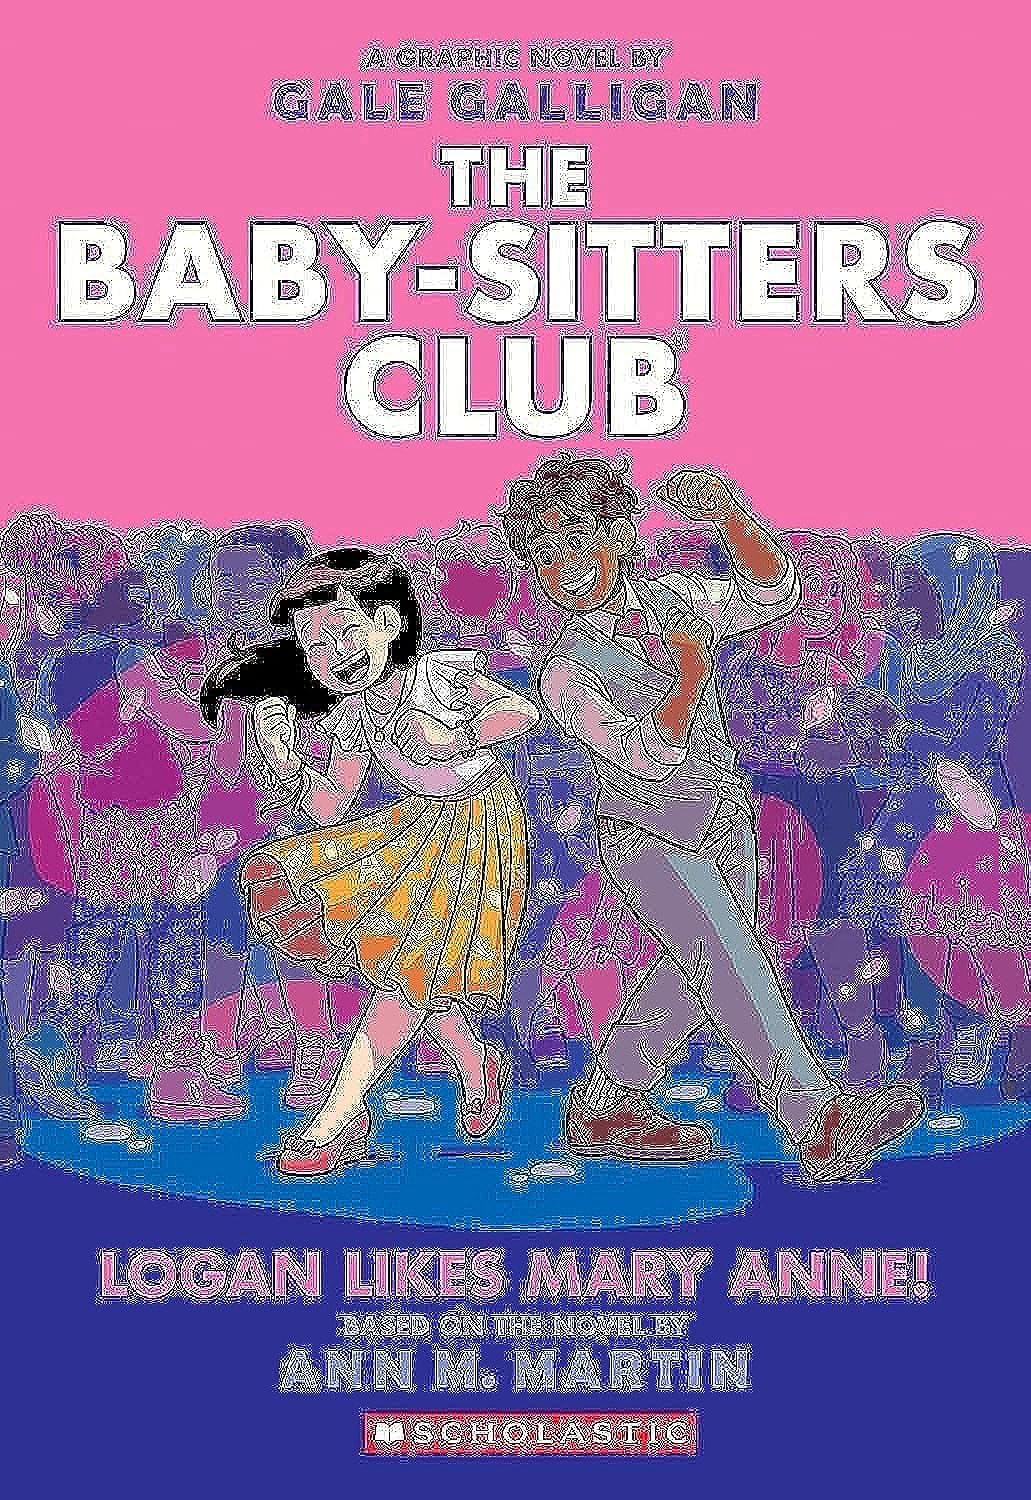 Logan Likes Mary Anne!: A Graphic Novel (The Baby-Sitters Club #8) (8) (The Baby-Sitters Club Graphix)